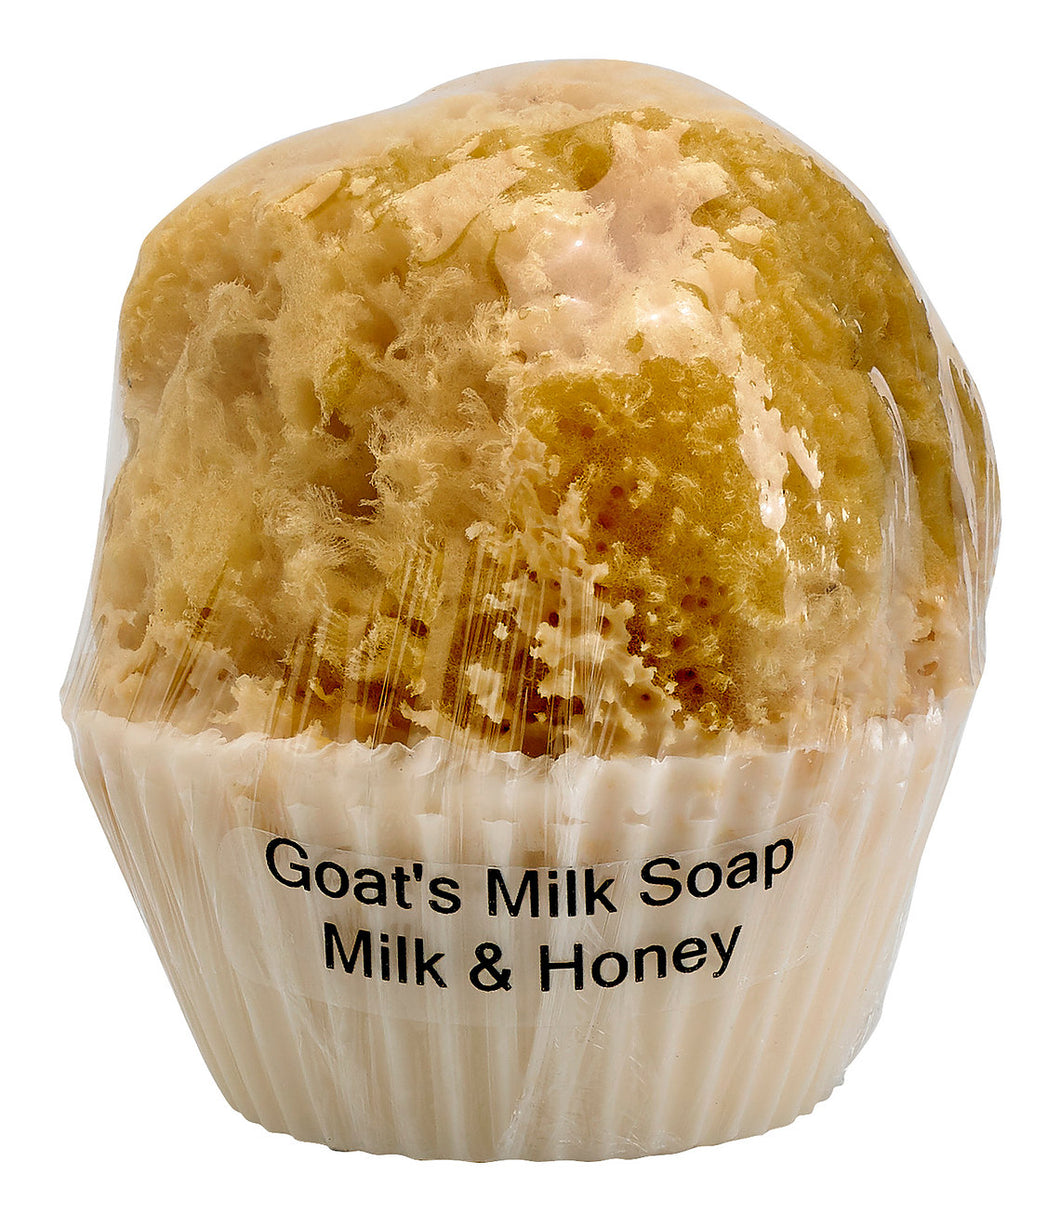 Milk and Honey Goats Milk. Olive Oil Soap Cupcake and Sponge - Off The Trail Gifts